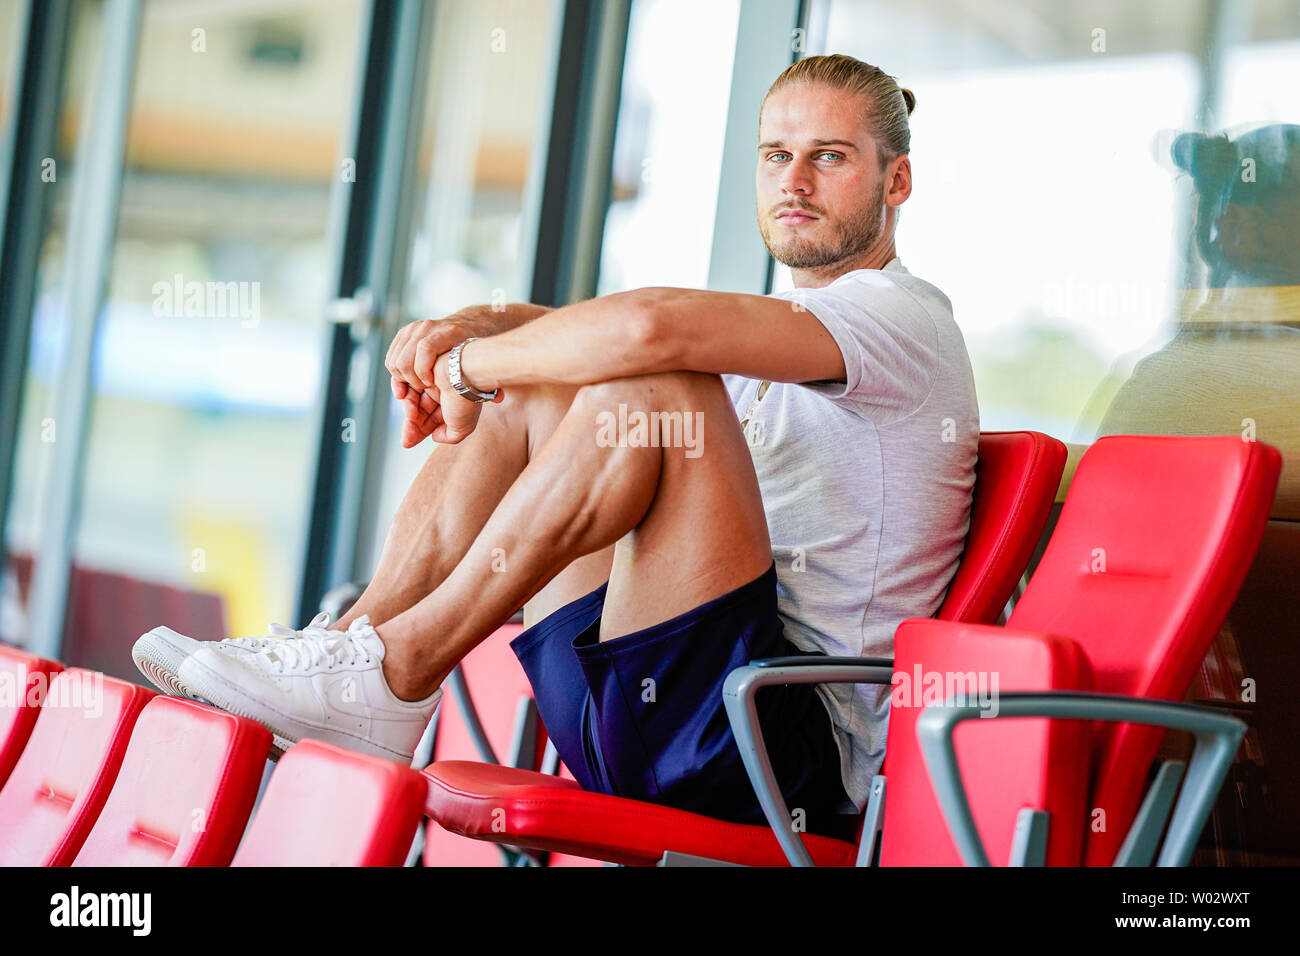 Sandhausen, Germany. 25th June, 2019. Rurik Gislason, player of the second division football team SV Sandhausen, is sitting on the stadium grandstand during a conversation. Gislason from SV Sandhausen became world famous a year ago. Not because he delivered sensational performances for Iceland at the World Cup in Russia, but because of his appearance. (to dpa 'One year after the hype: The new life of the 'beautiful' Rurik Gislason') Credit: Uwe Anspach/dpa/Alamy Live News Stock Photo